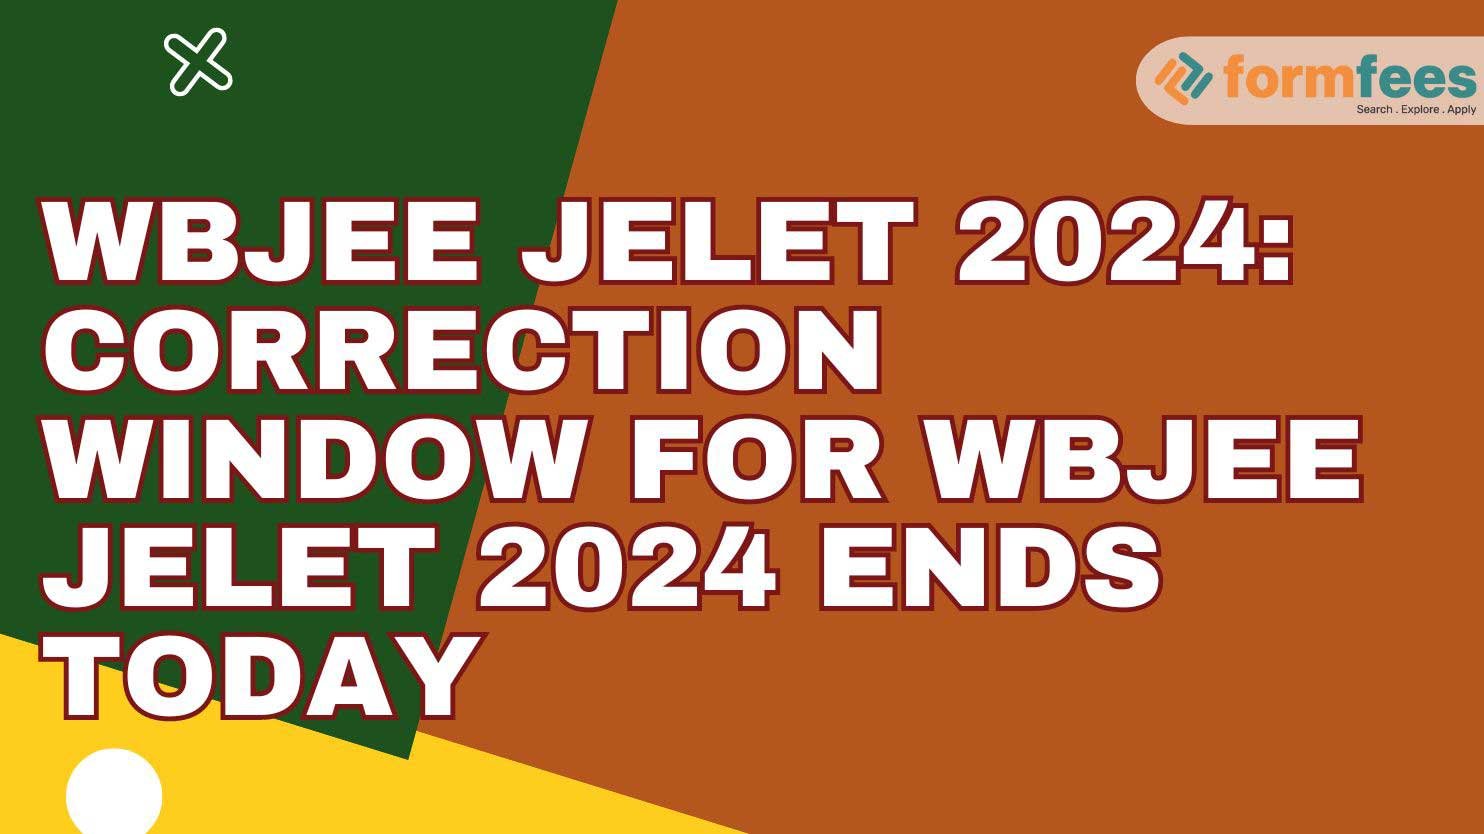 WBJEE JELET 2024: Correction Window for WBJEE JELET 2024 Ends Today